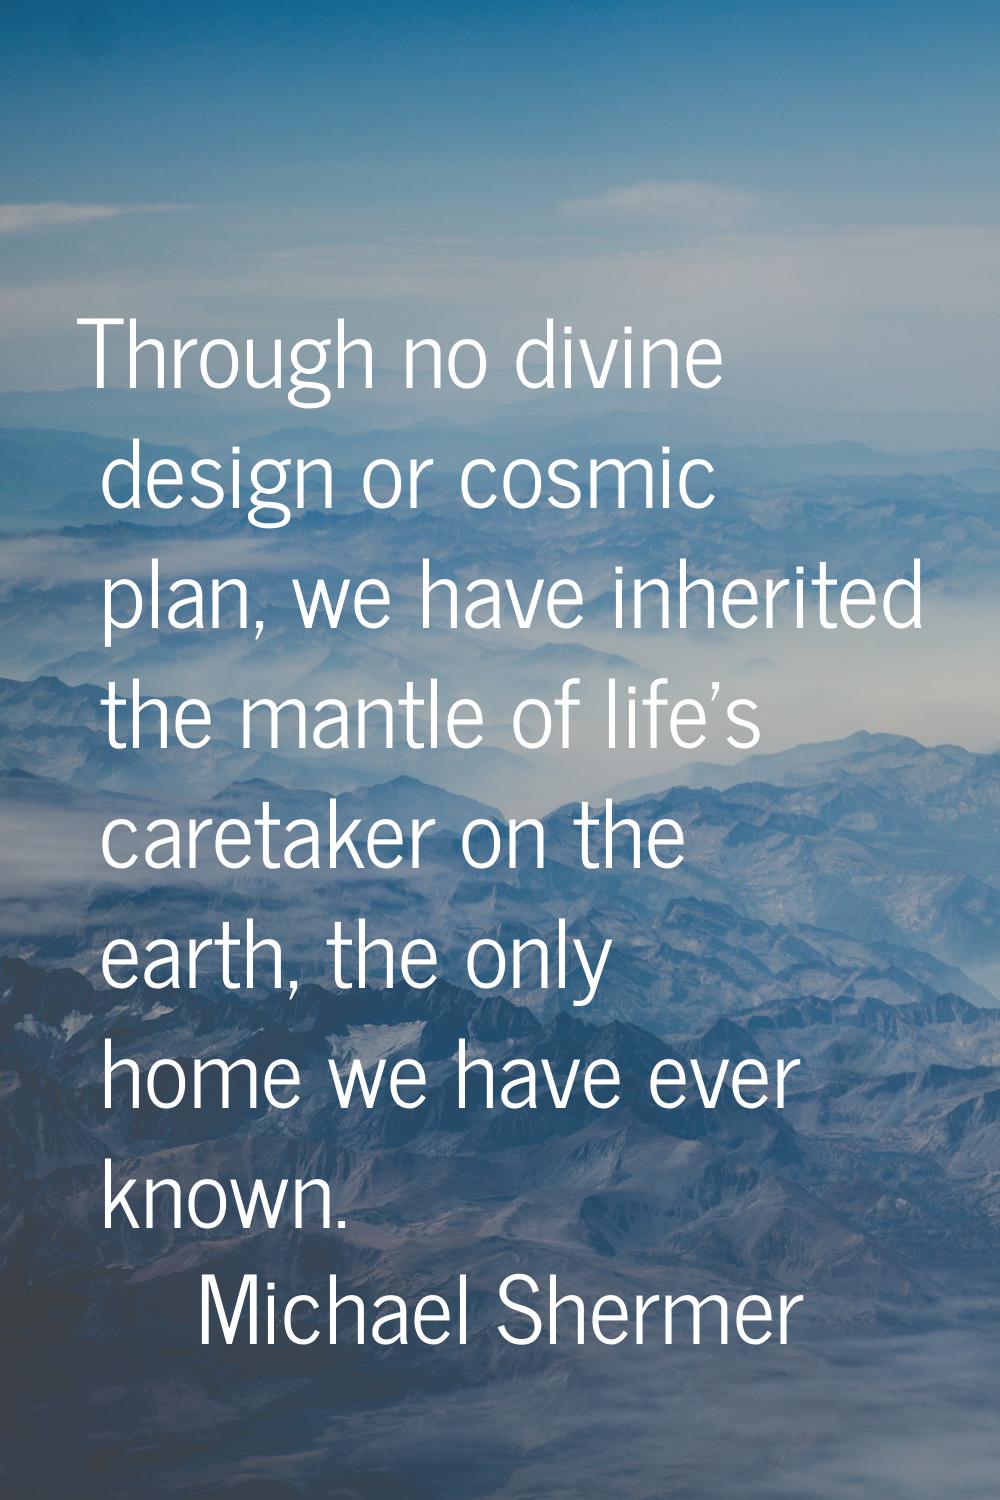 Through no divine design or cosmic plan, we have inherited the mantle of life's caretaker on the ea